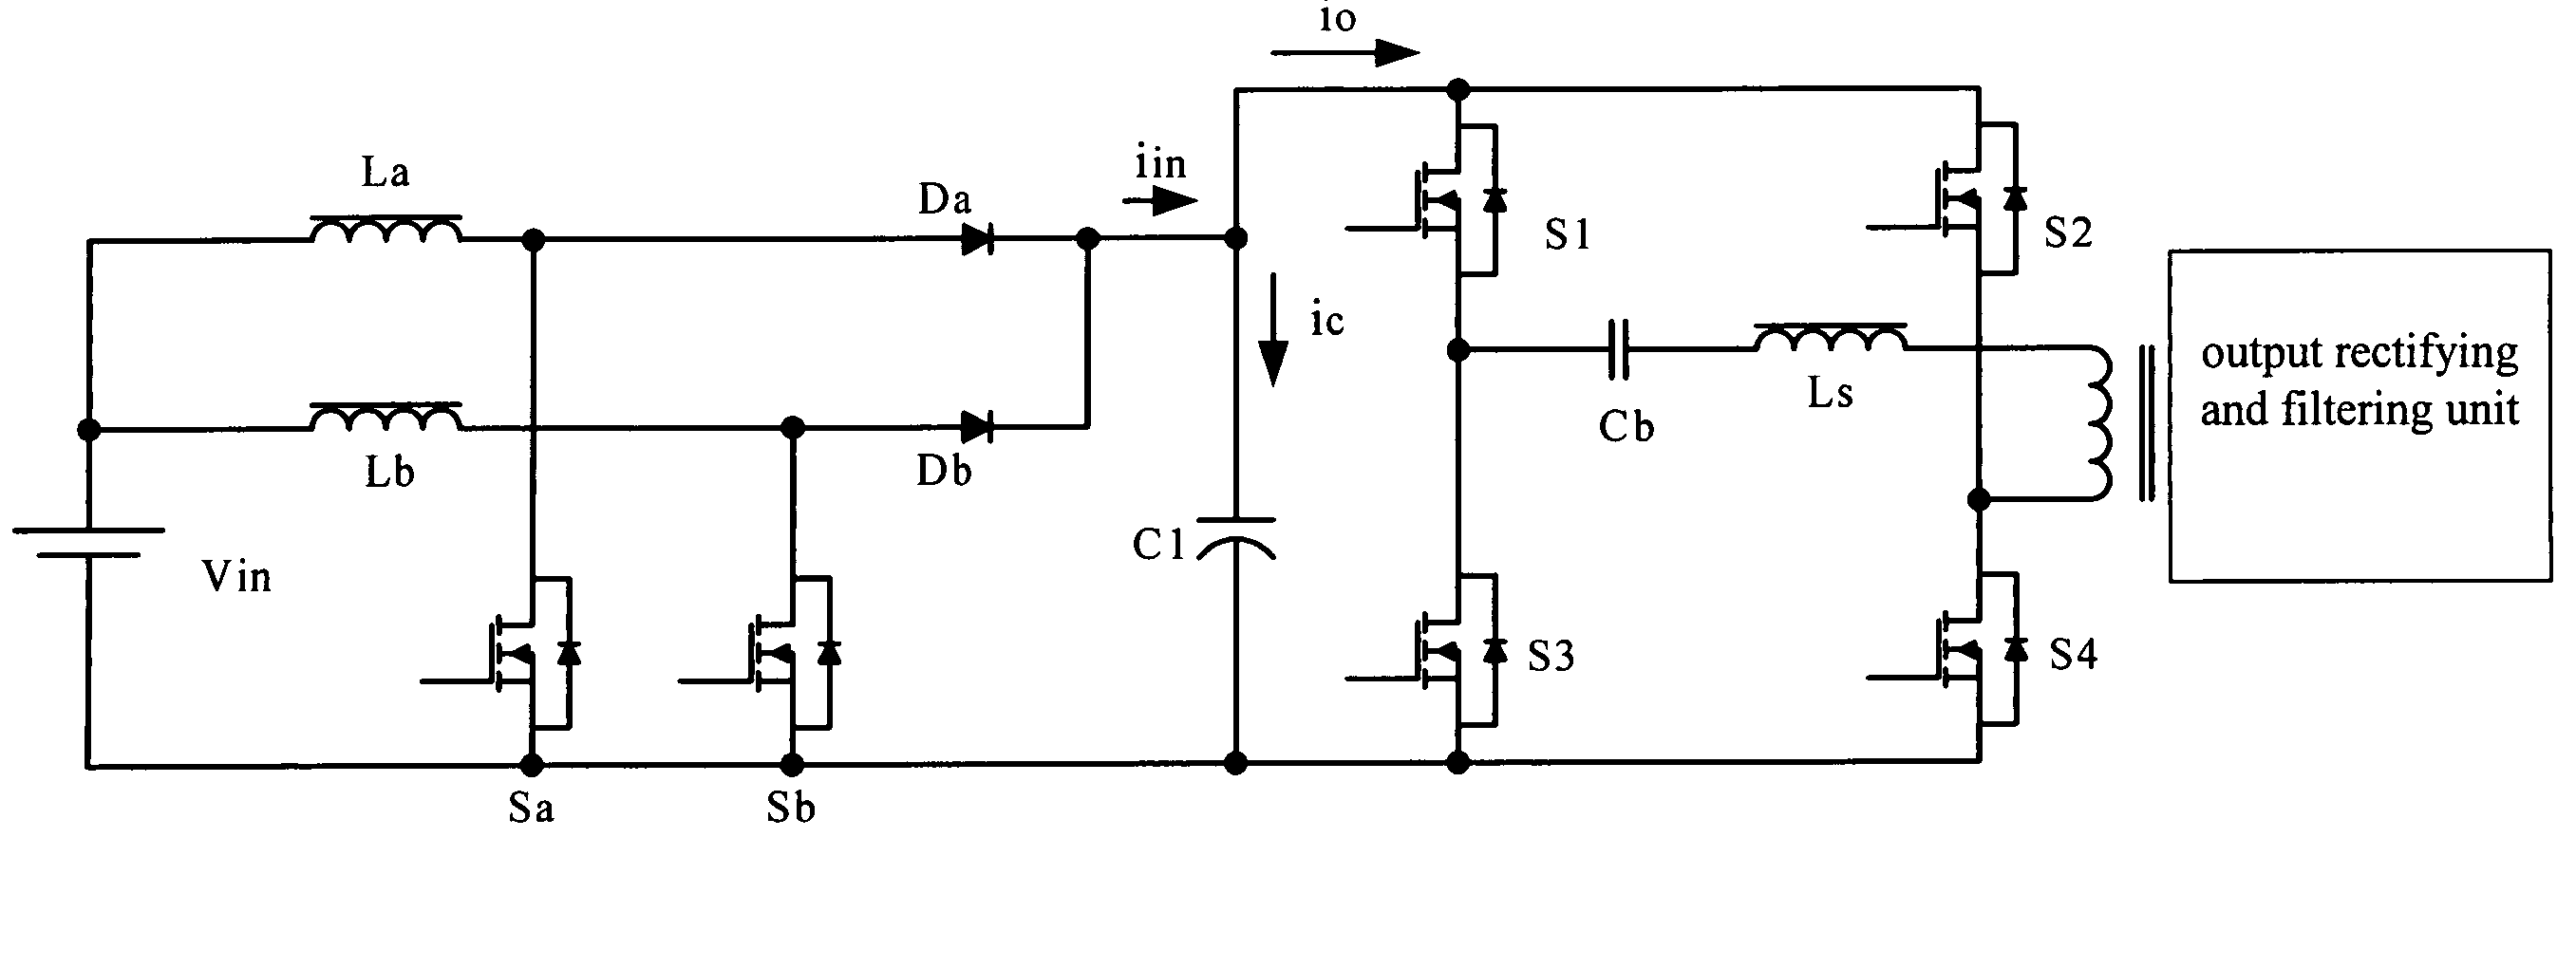 DC-DC converter circuits and method for reducing DC bus capacitor current